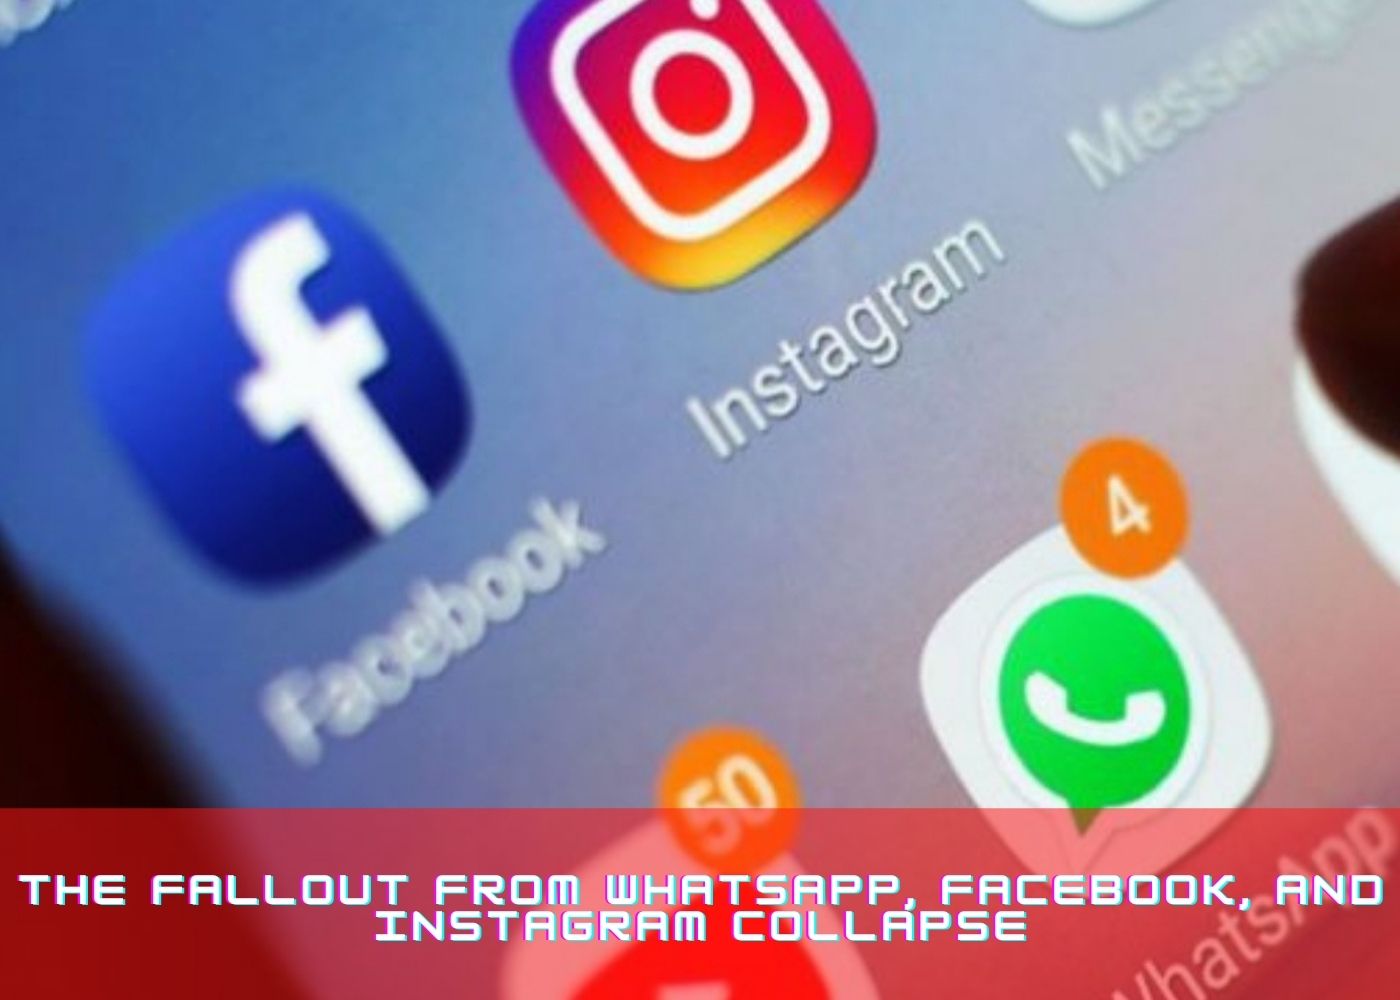 The fallout from WhatsApp, Facebook, and Instagram collapse